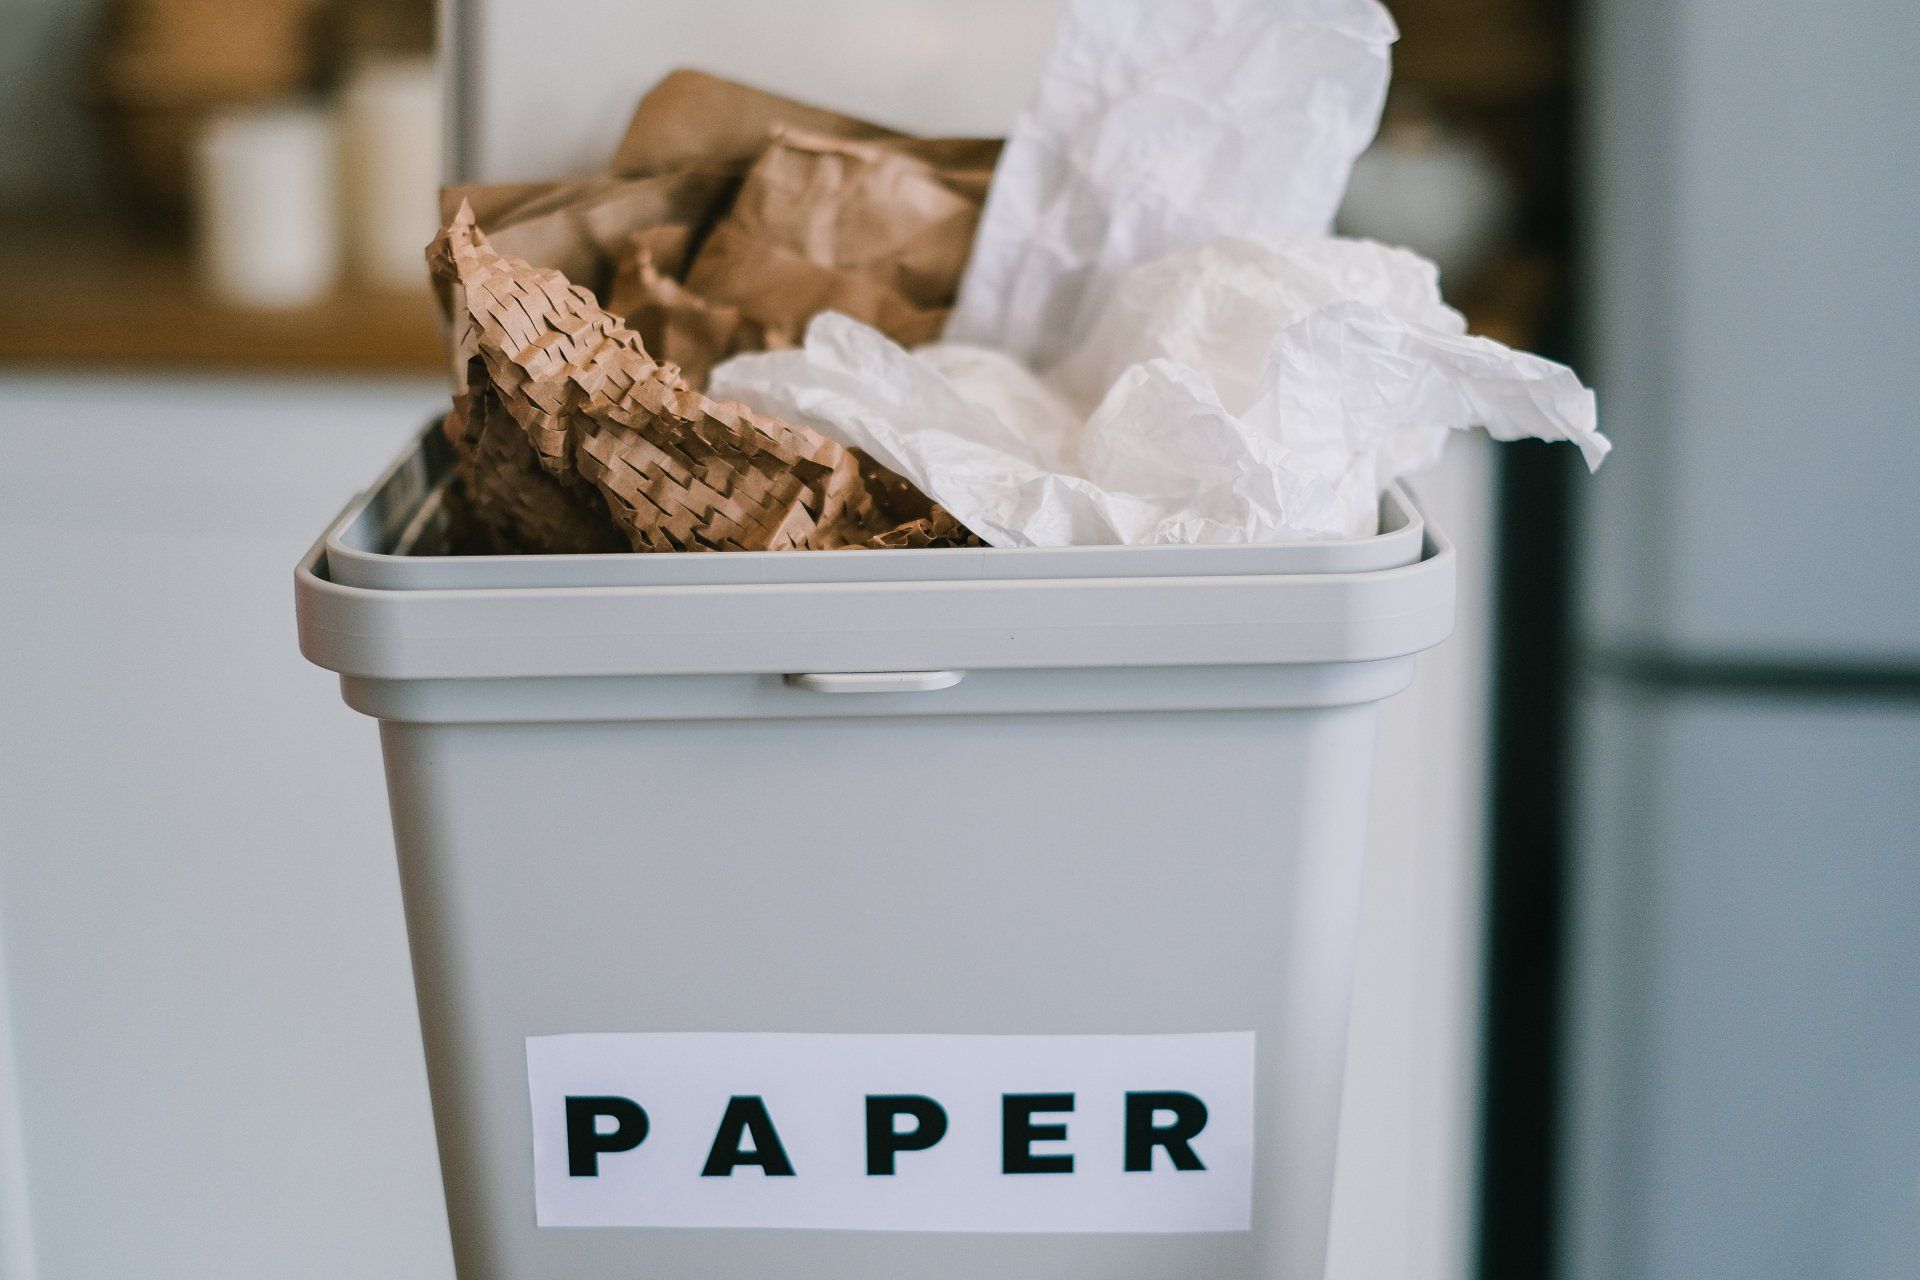 papers on a trash can